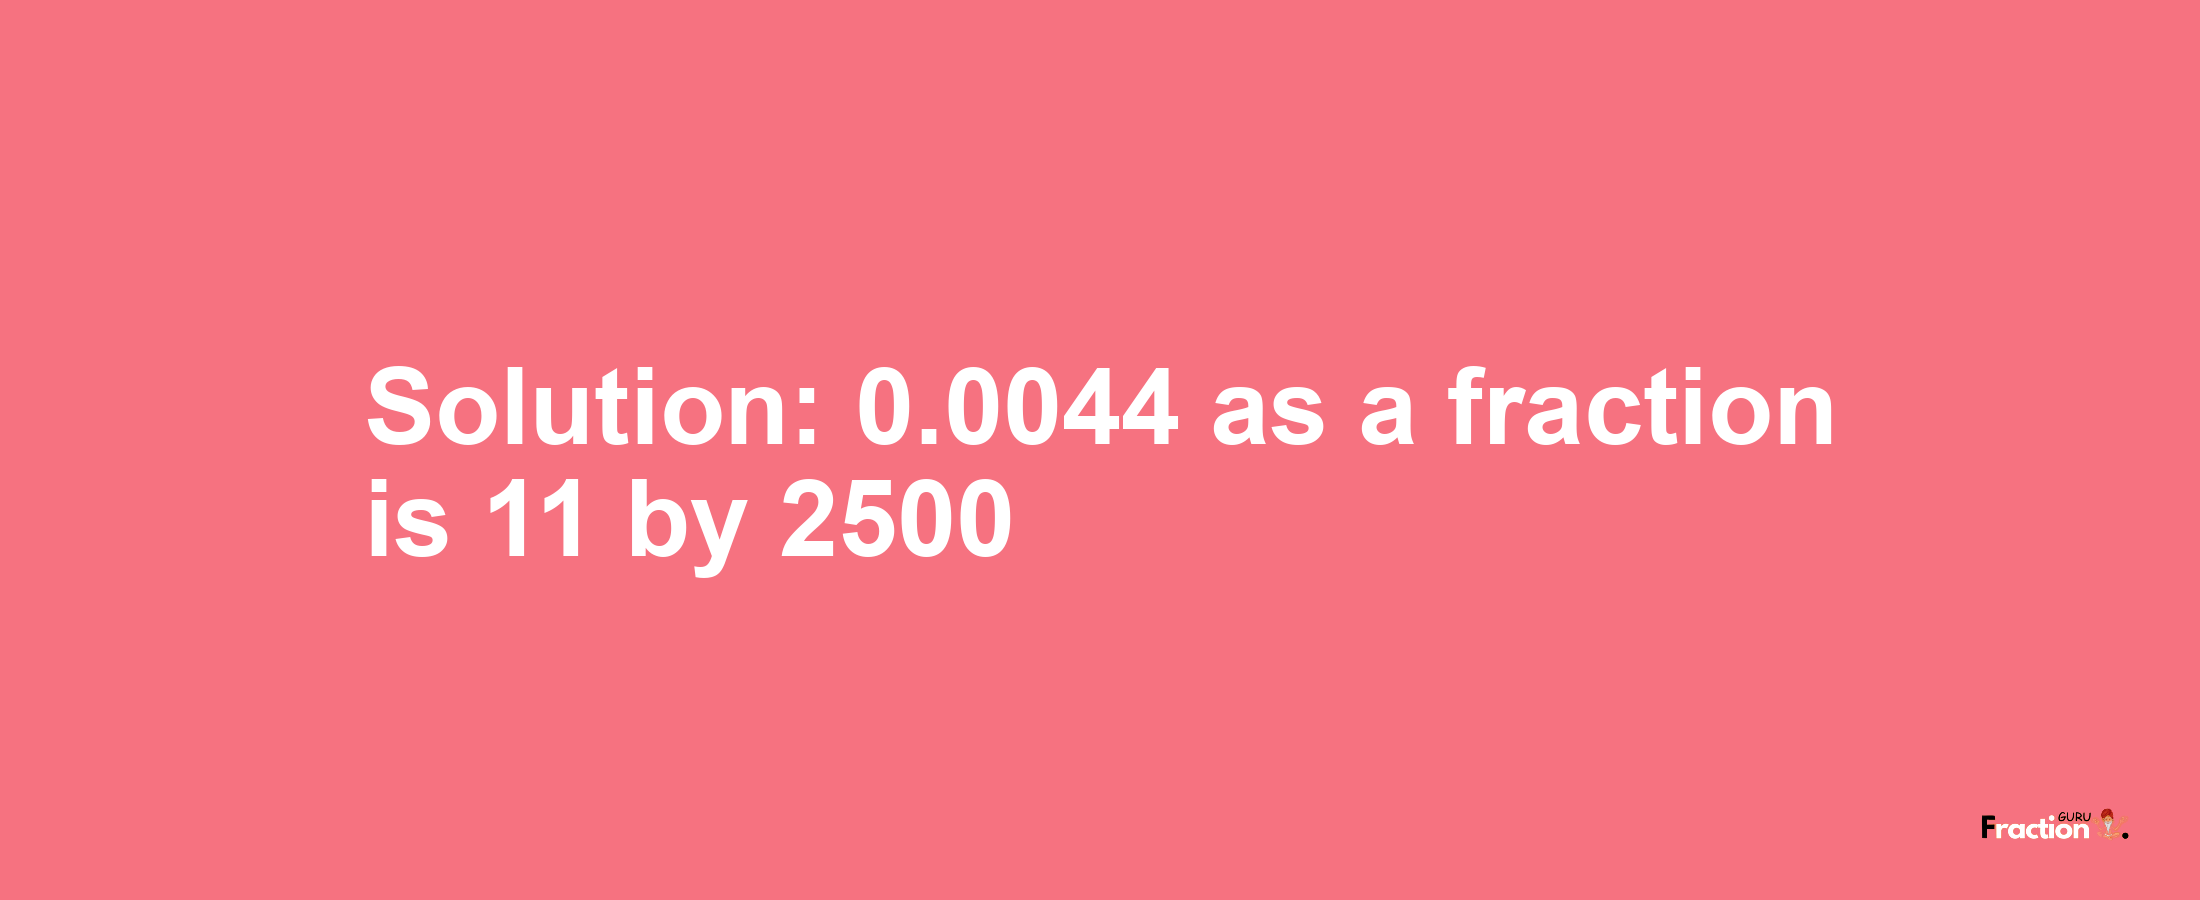 Solution:0.0044 as a fraction is 11/2500